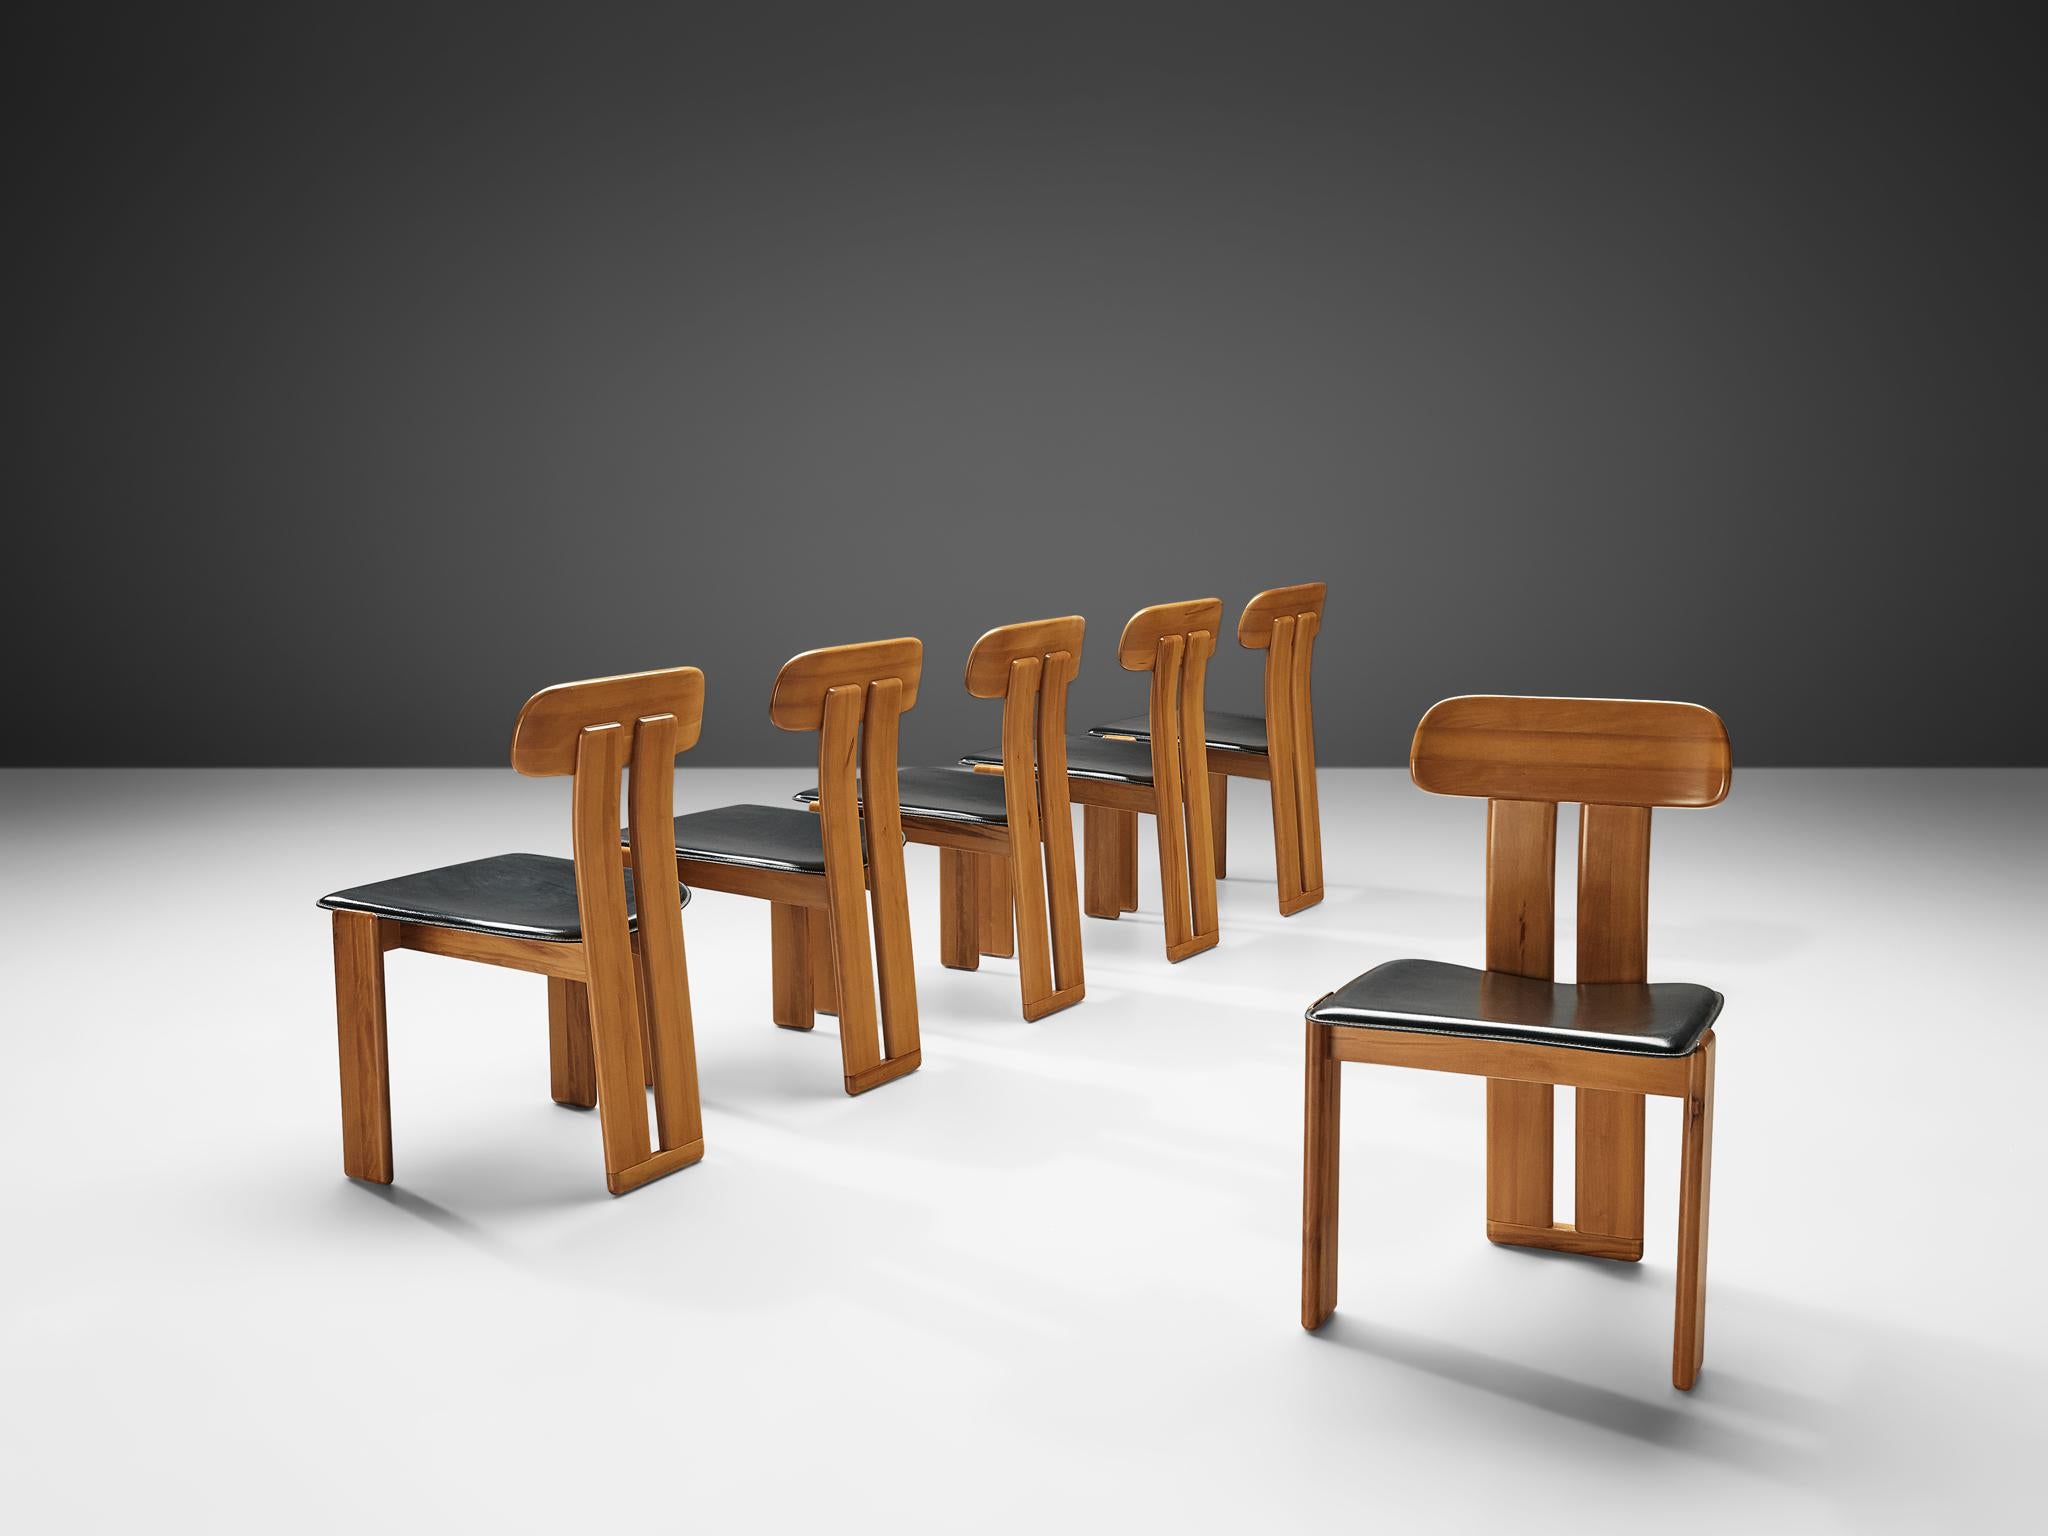 Sapporo for Mobil Girgi, set of six dining chairs, Italian walnut and cognac leather, Italy, 1970s.

Set of six sculptural chairs that feature wonderful backrests, consisting of two vertical slats distanced from each other. At the bottom and top